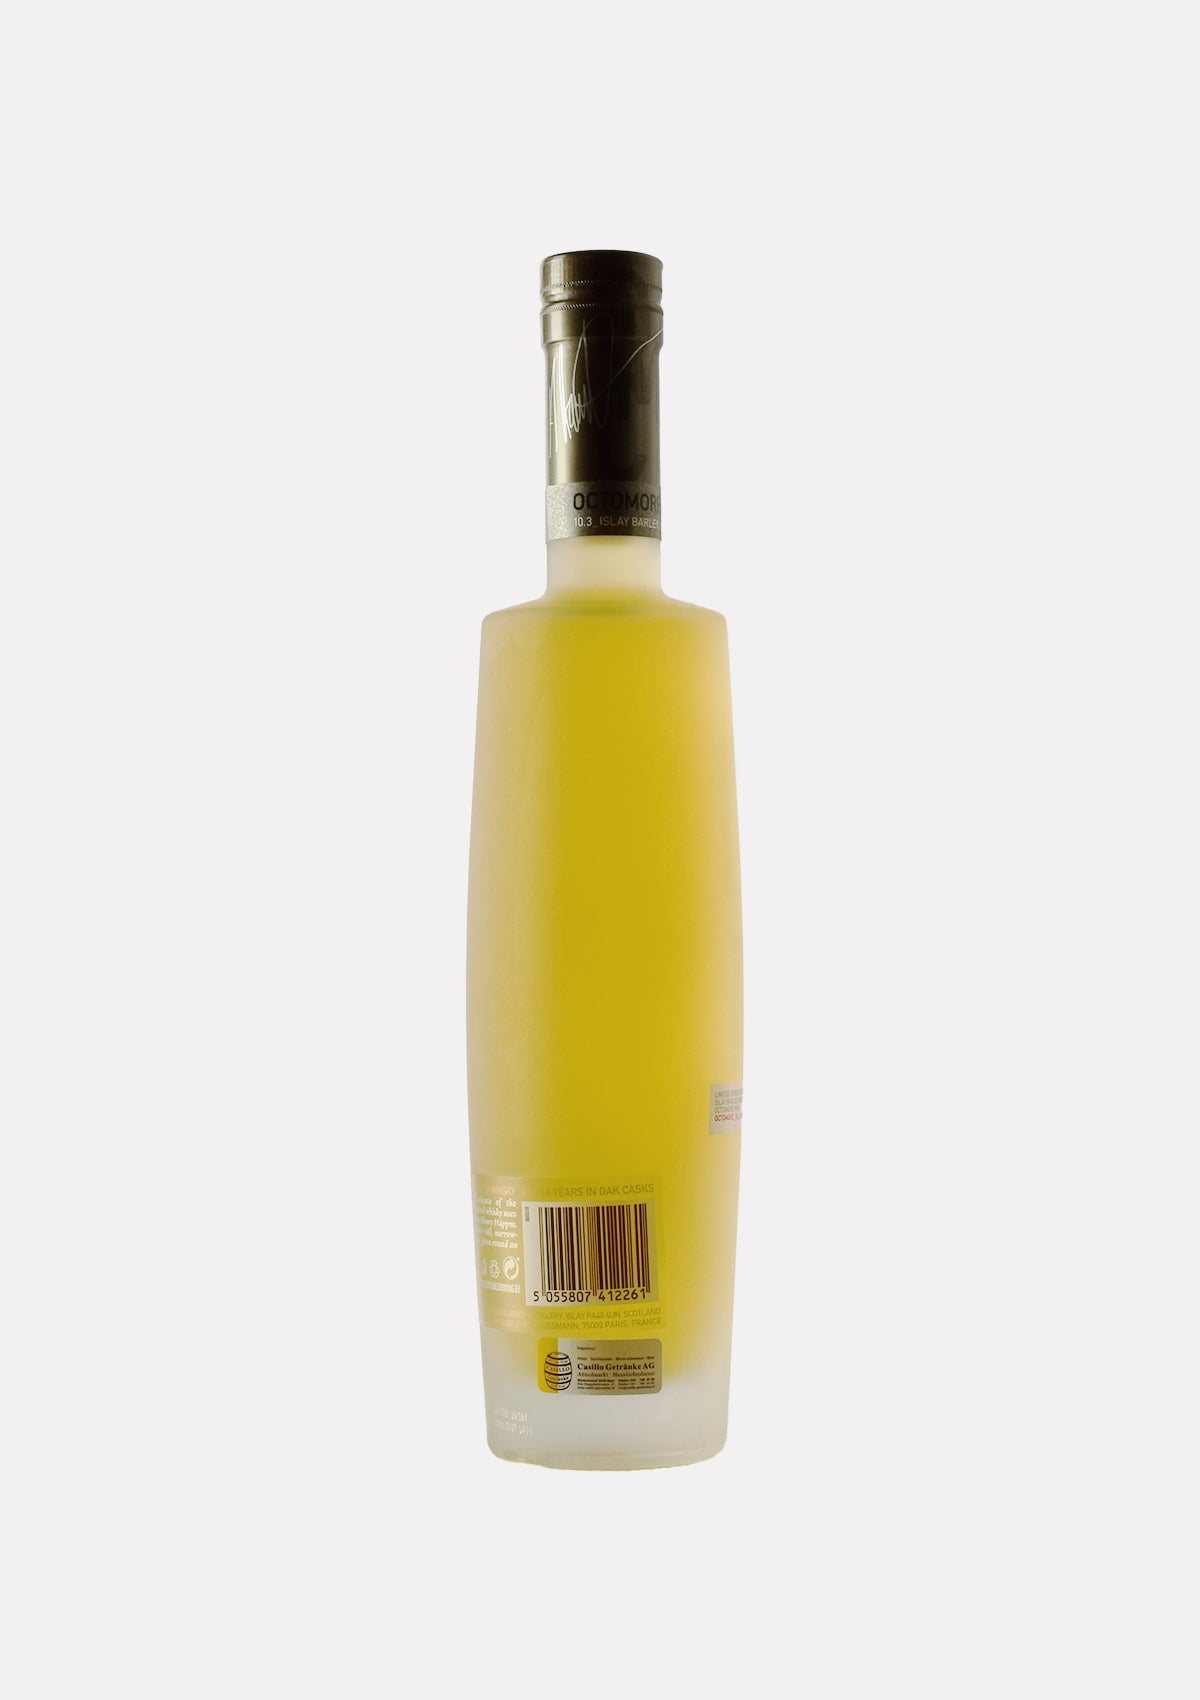 Octomore 10.3 114 ppm